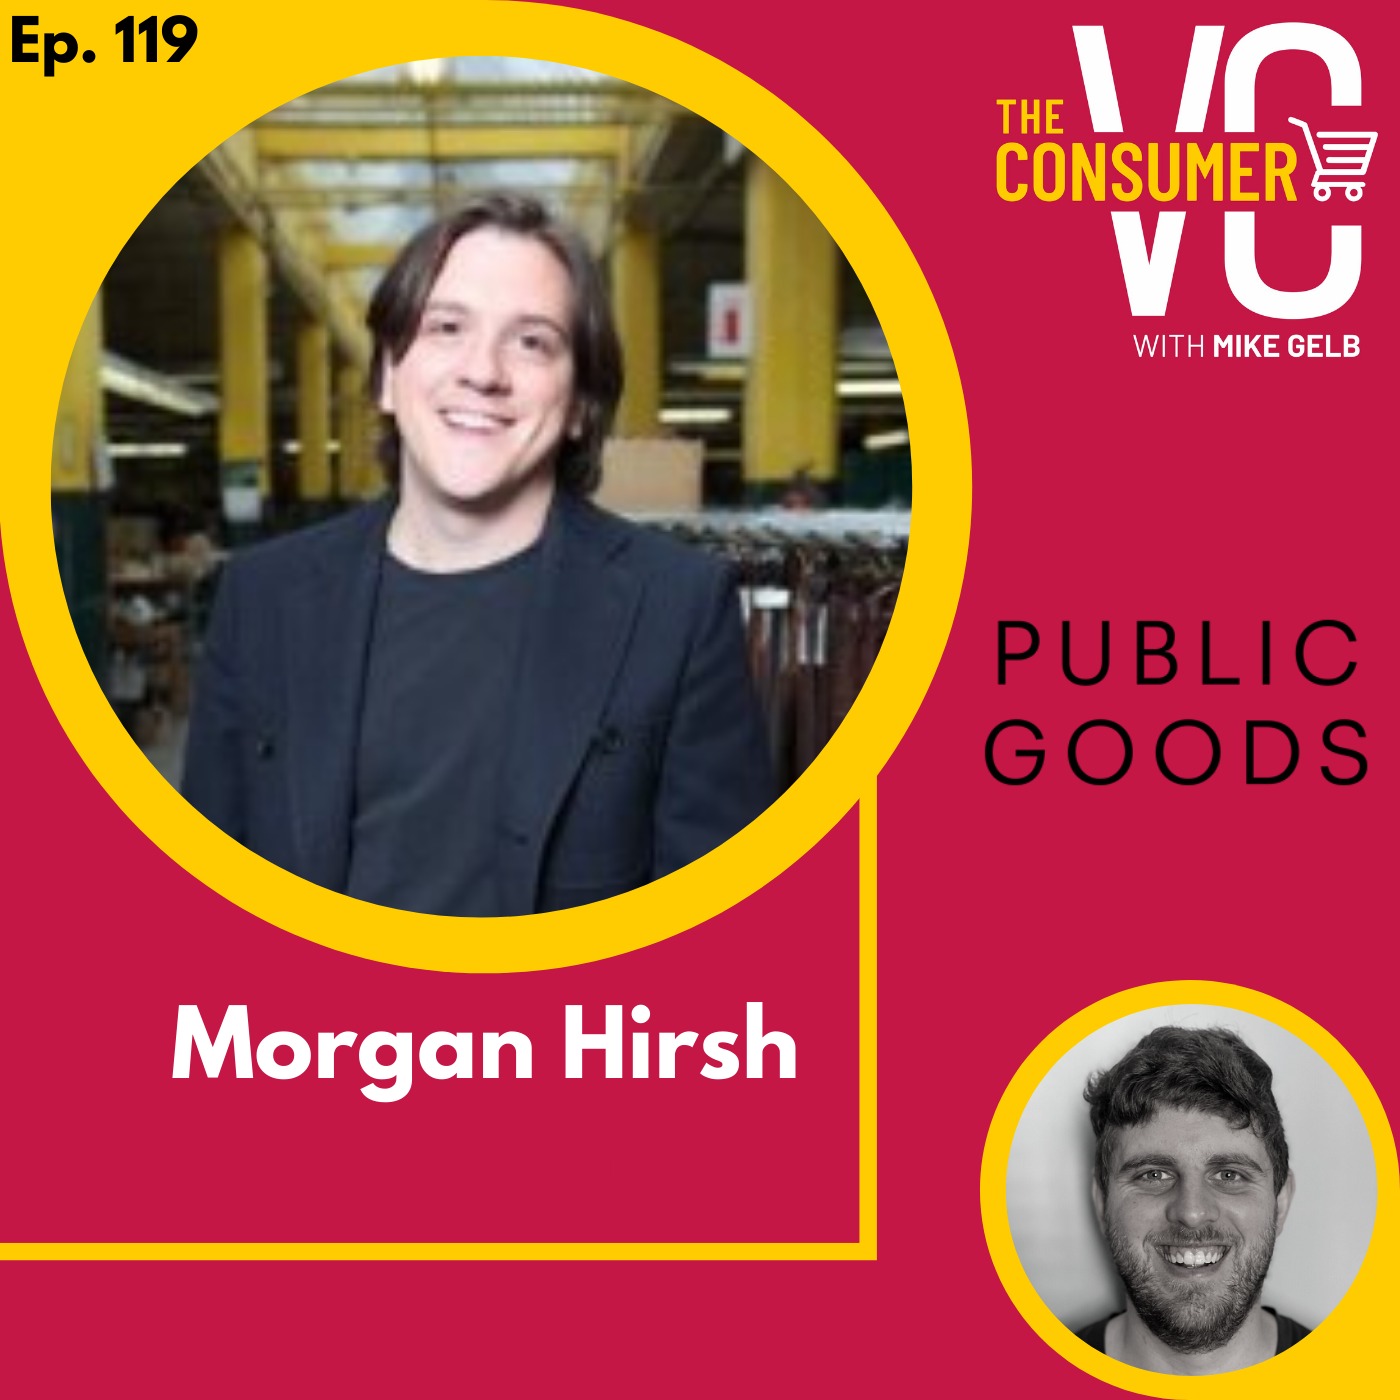 Morgan Hirsh (Public Goods) - Finding simplicity while focusing on selling sustainable essentials